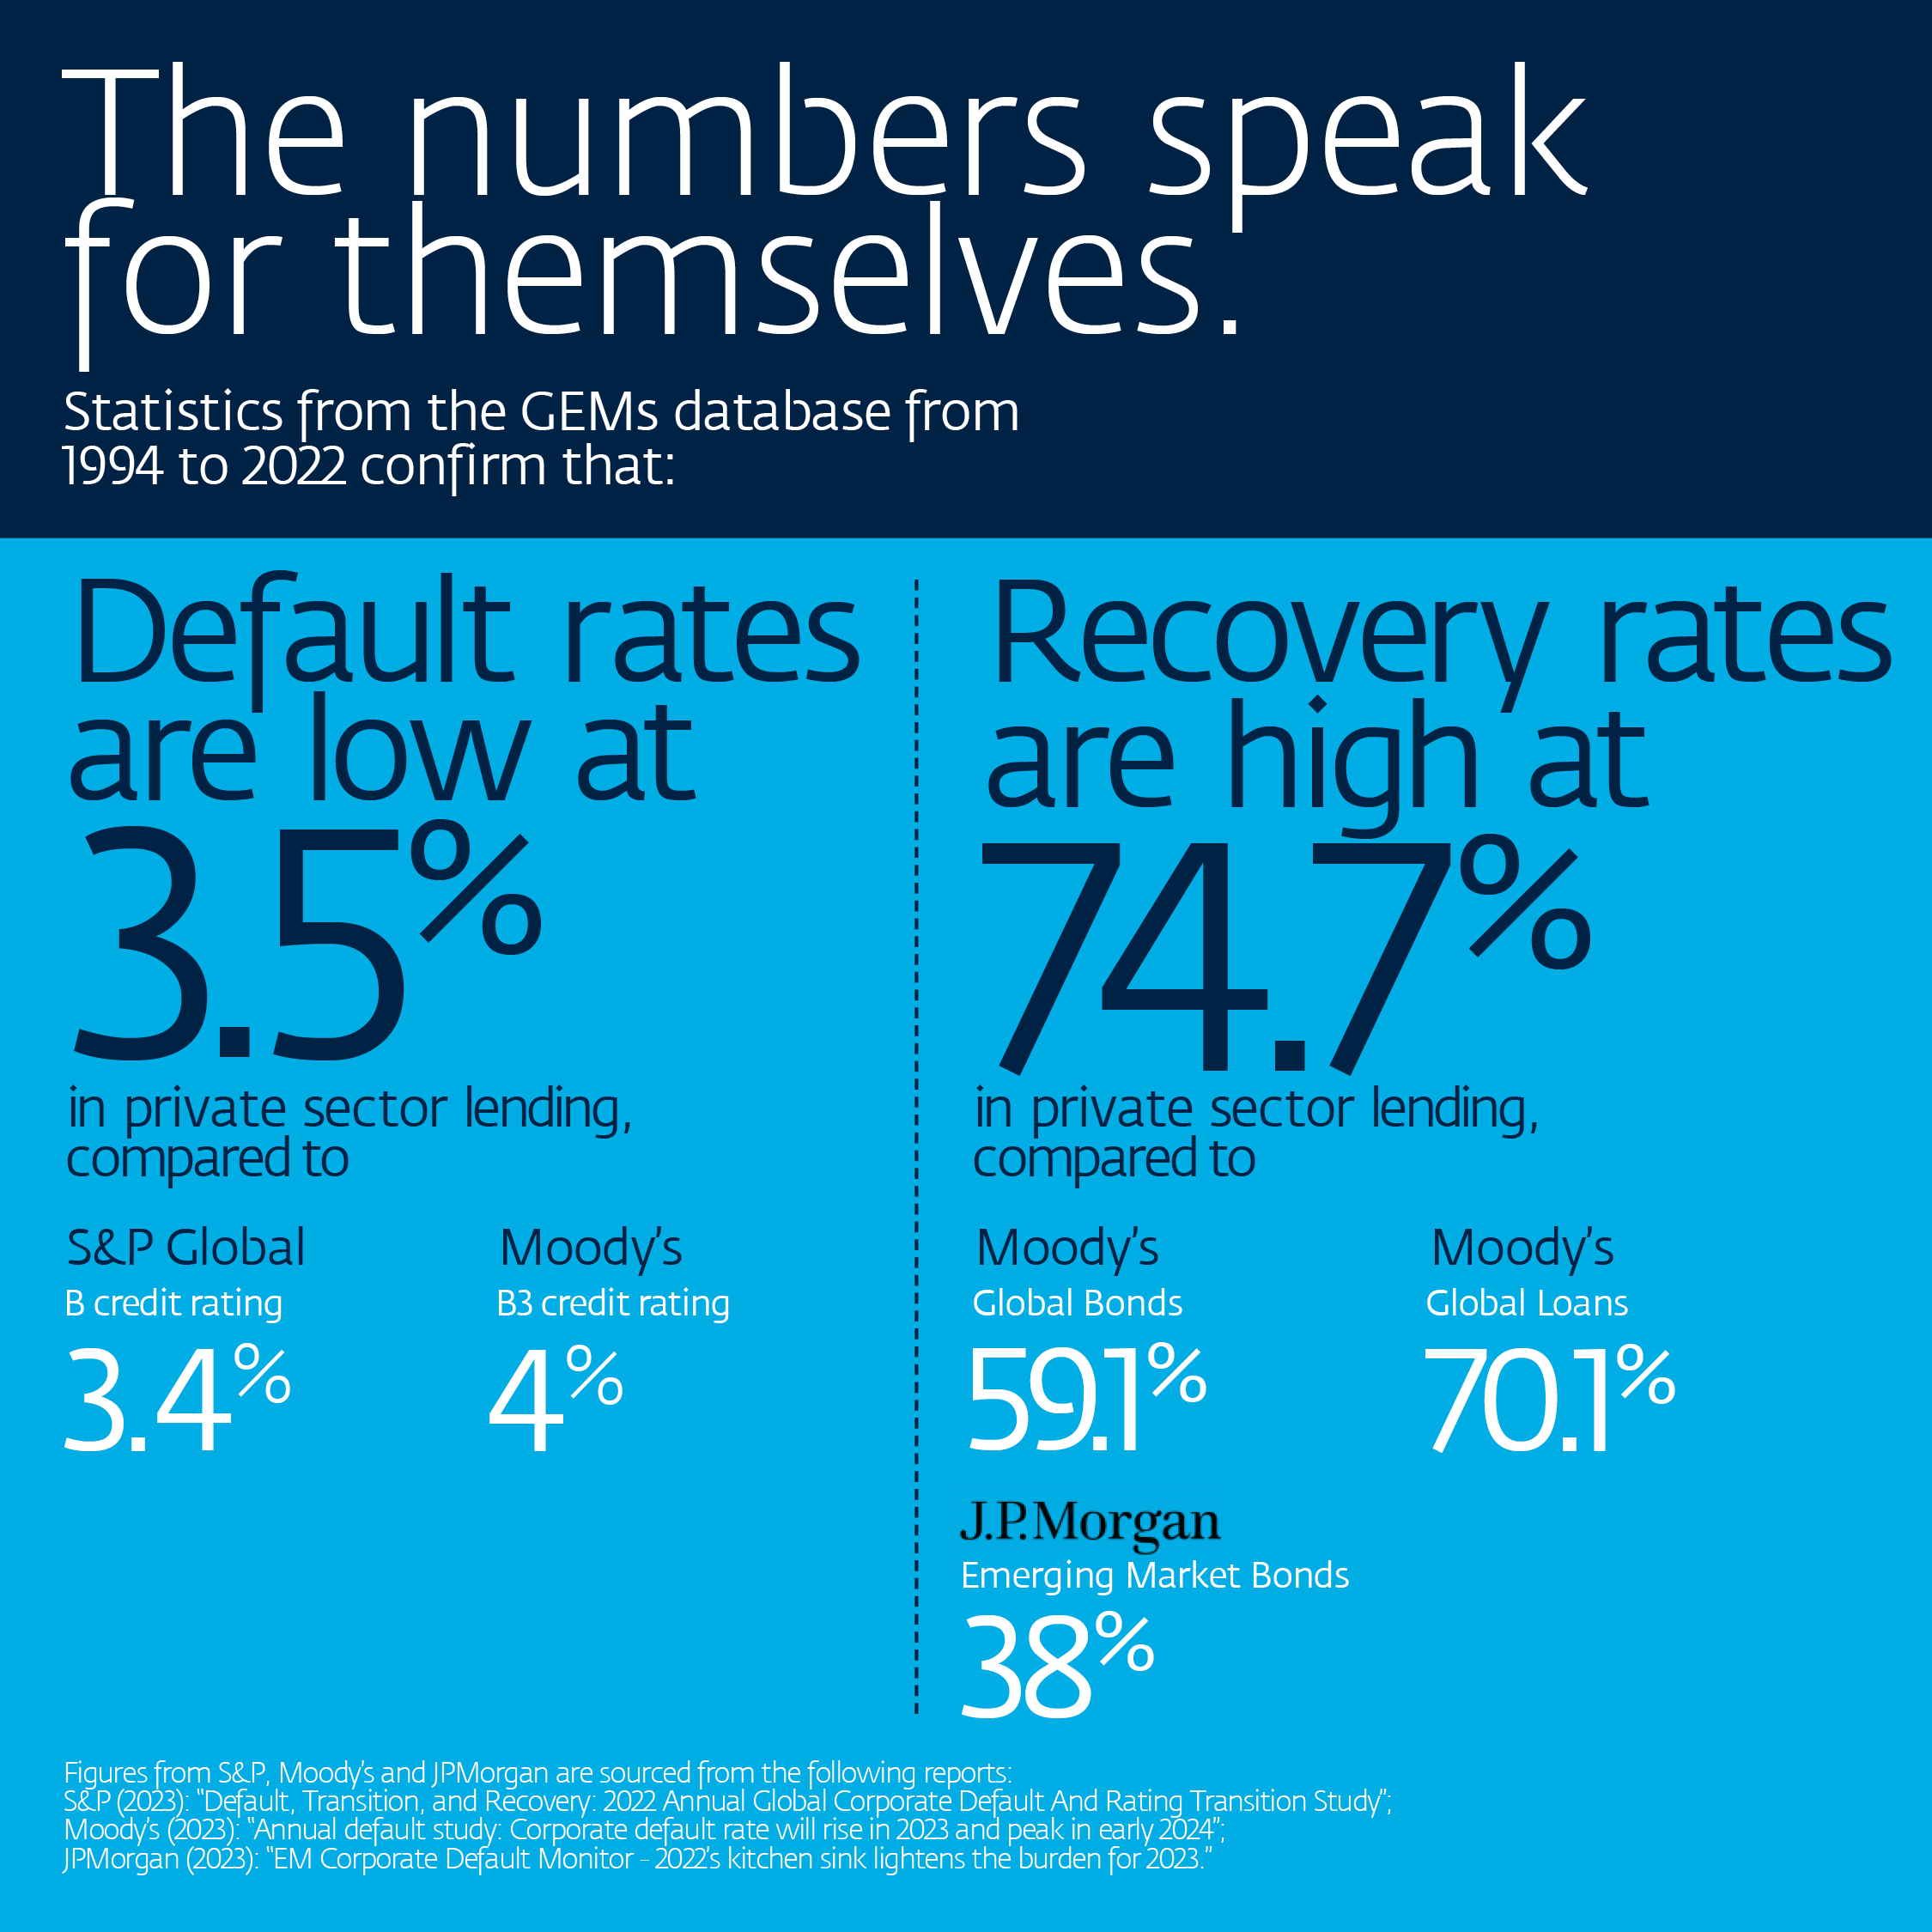 In emerging markets, the default rates are low and recovery rates are high at 3.5% and 74.7% respectively.